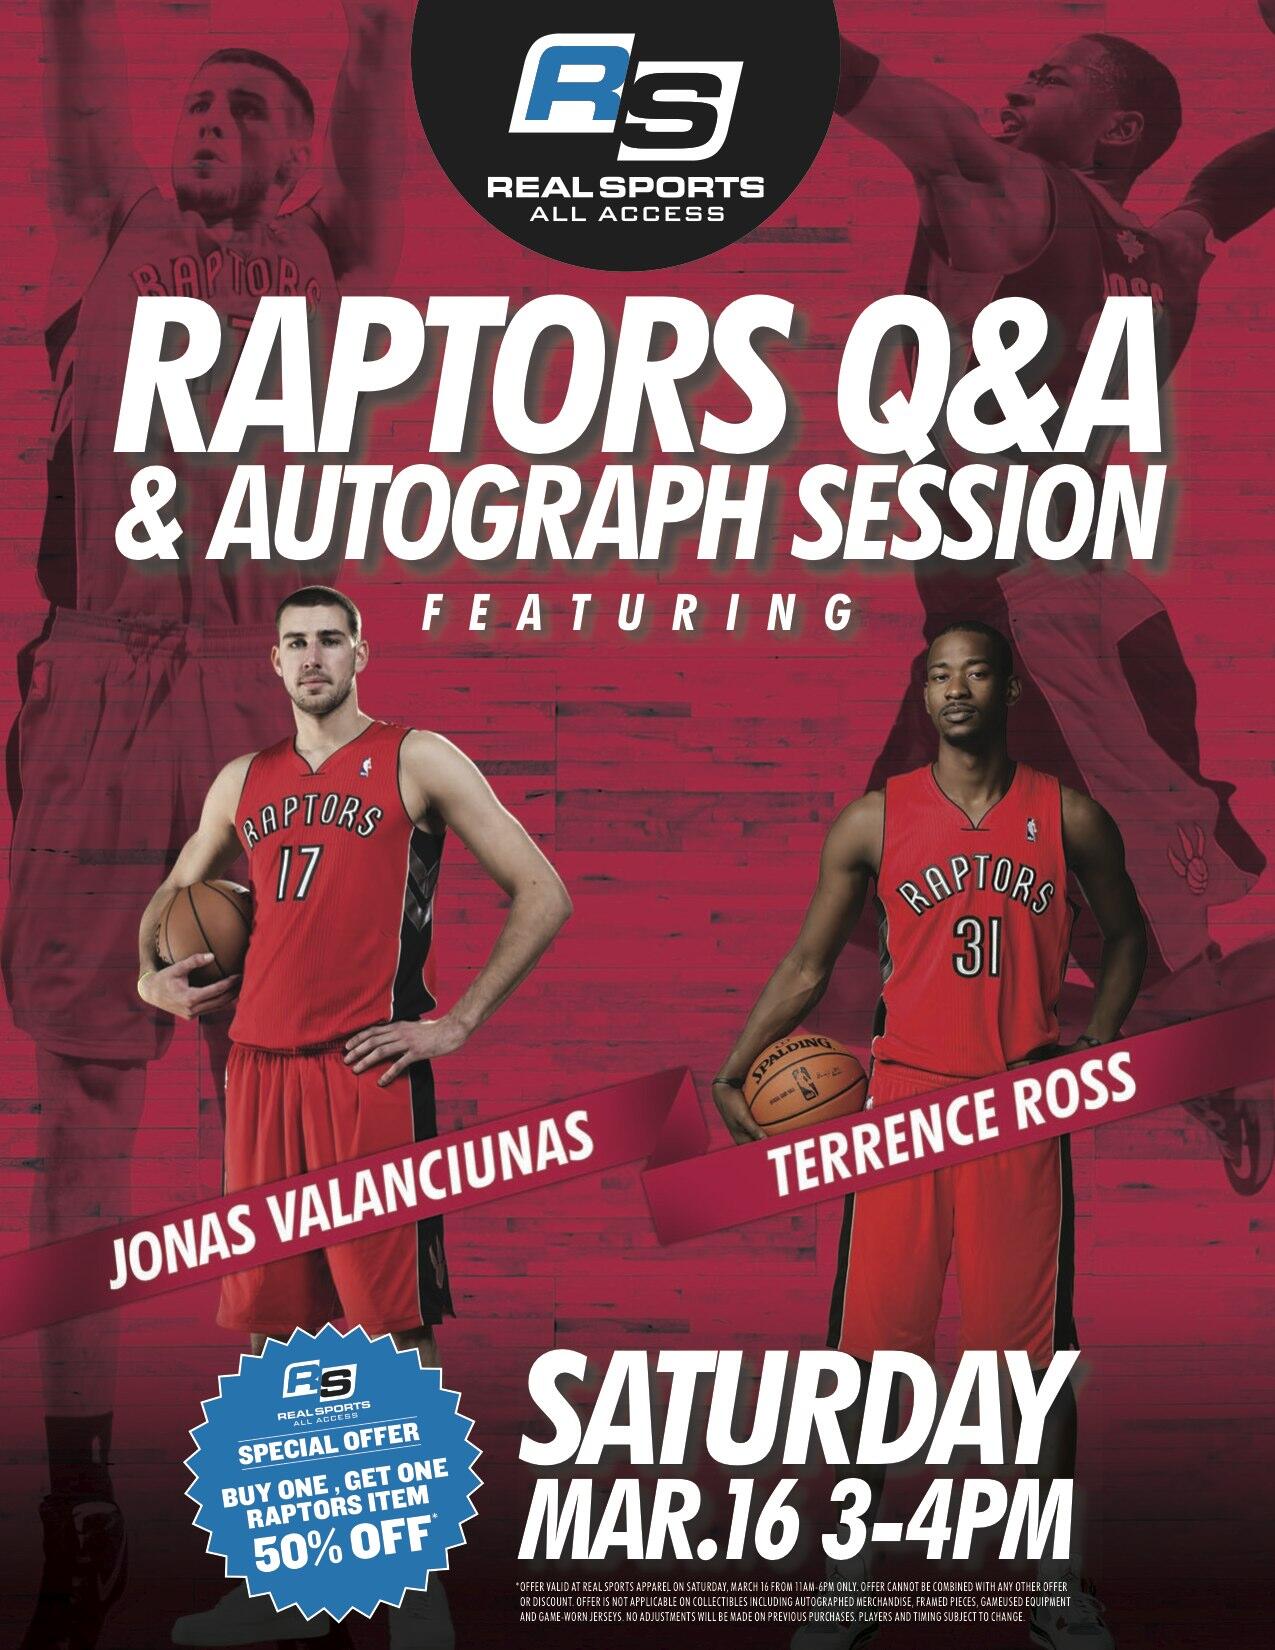 Terrence Ross Apparel, Terrence Ross Jerseys